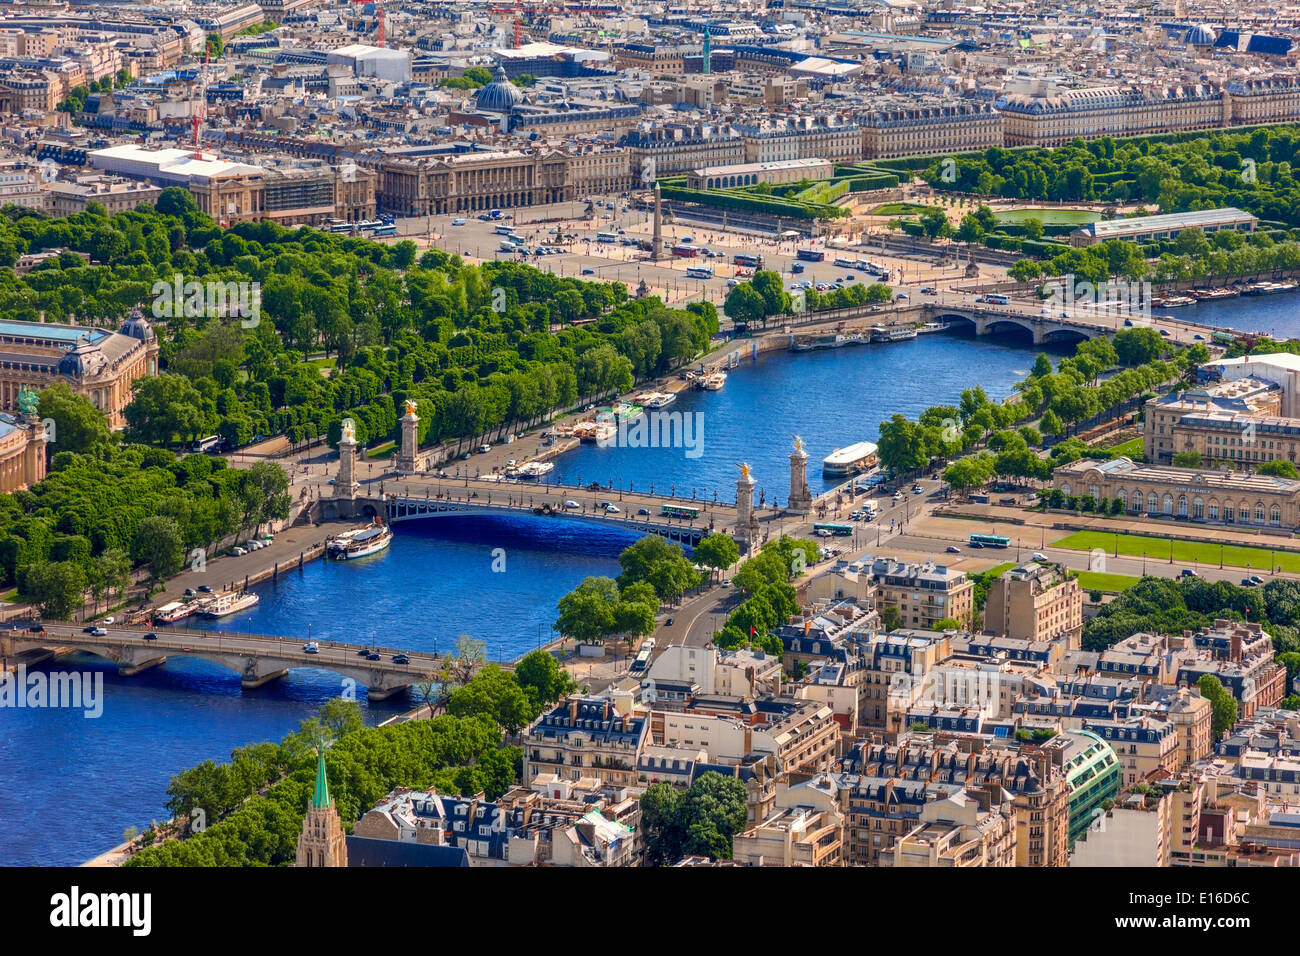 View of Paris, Pont Alexandre III, Luxor Obelisk and Place de la Concorde from the Eiffel tower Stock Photo